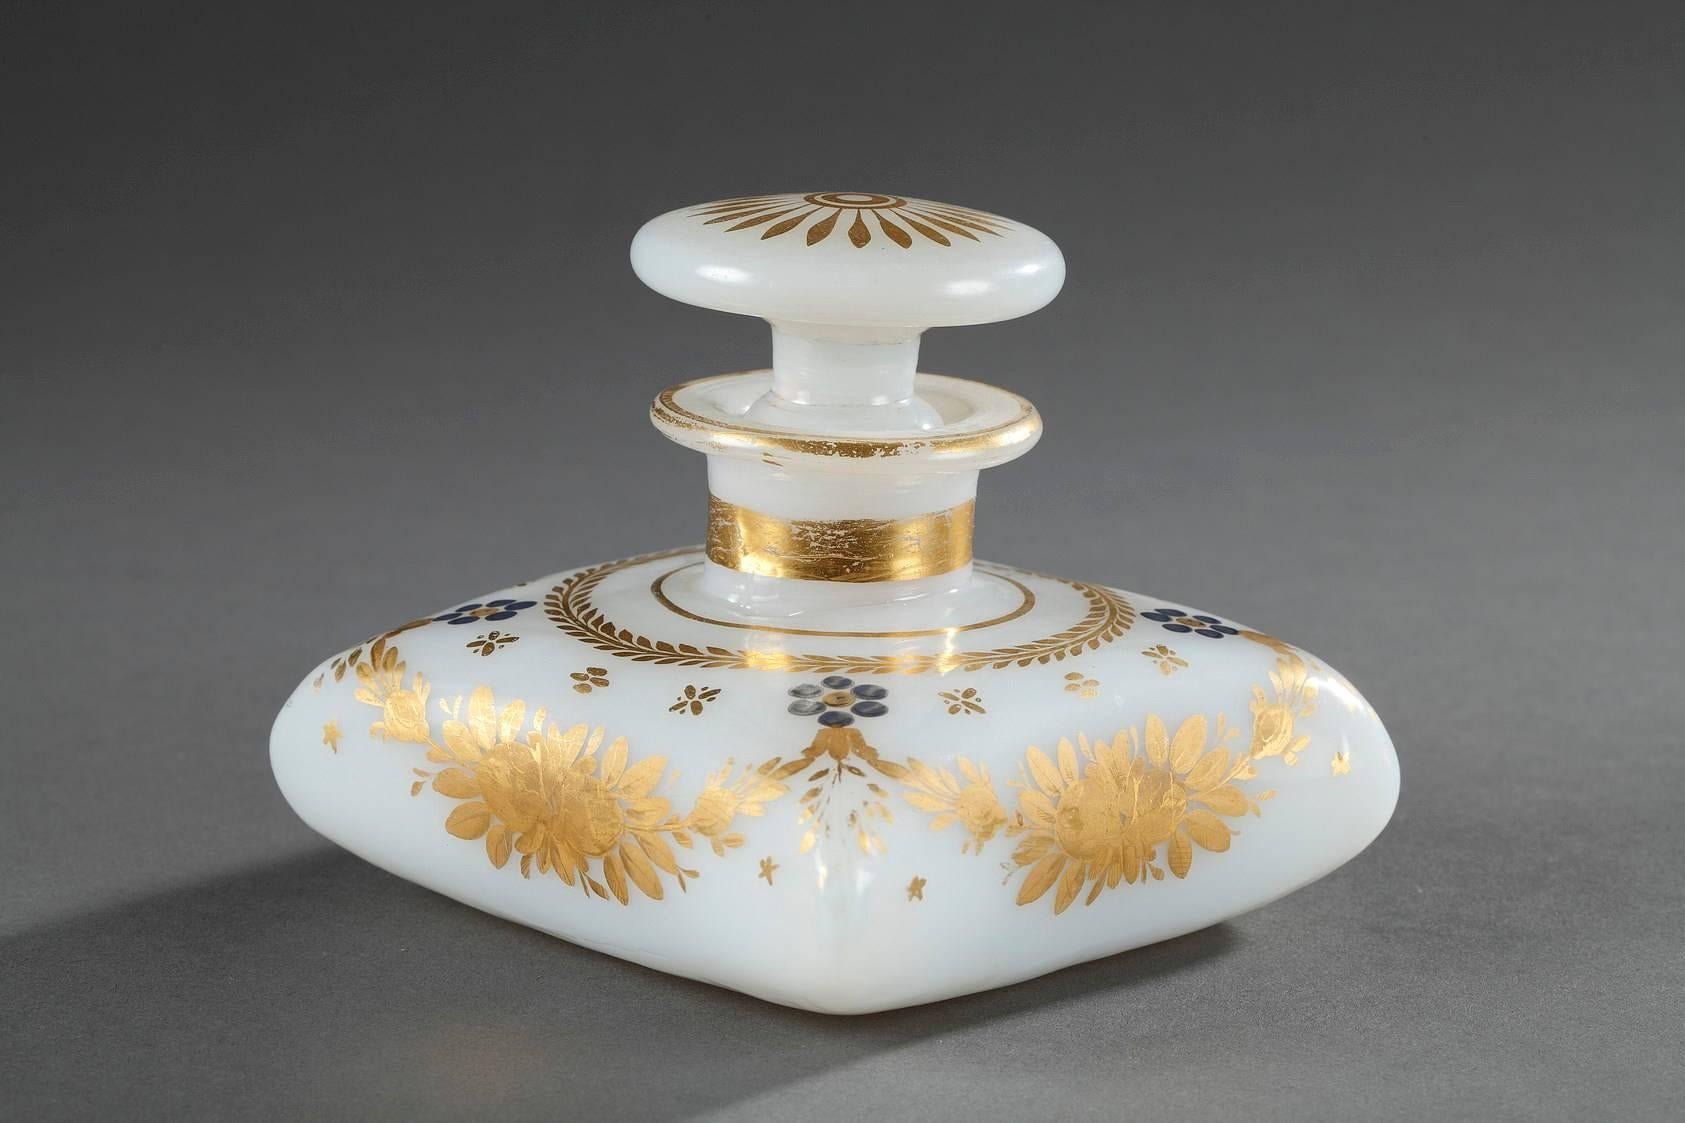 Opaline Glass Early 19th Century White Opaline Perfume Bottle with Desvignes Decoration